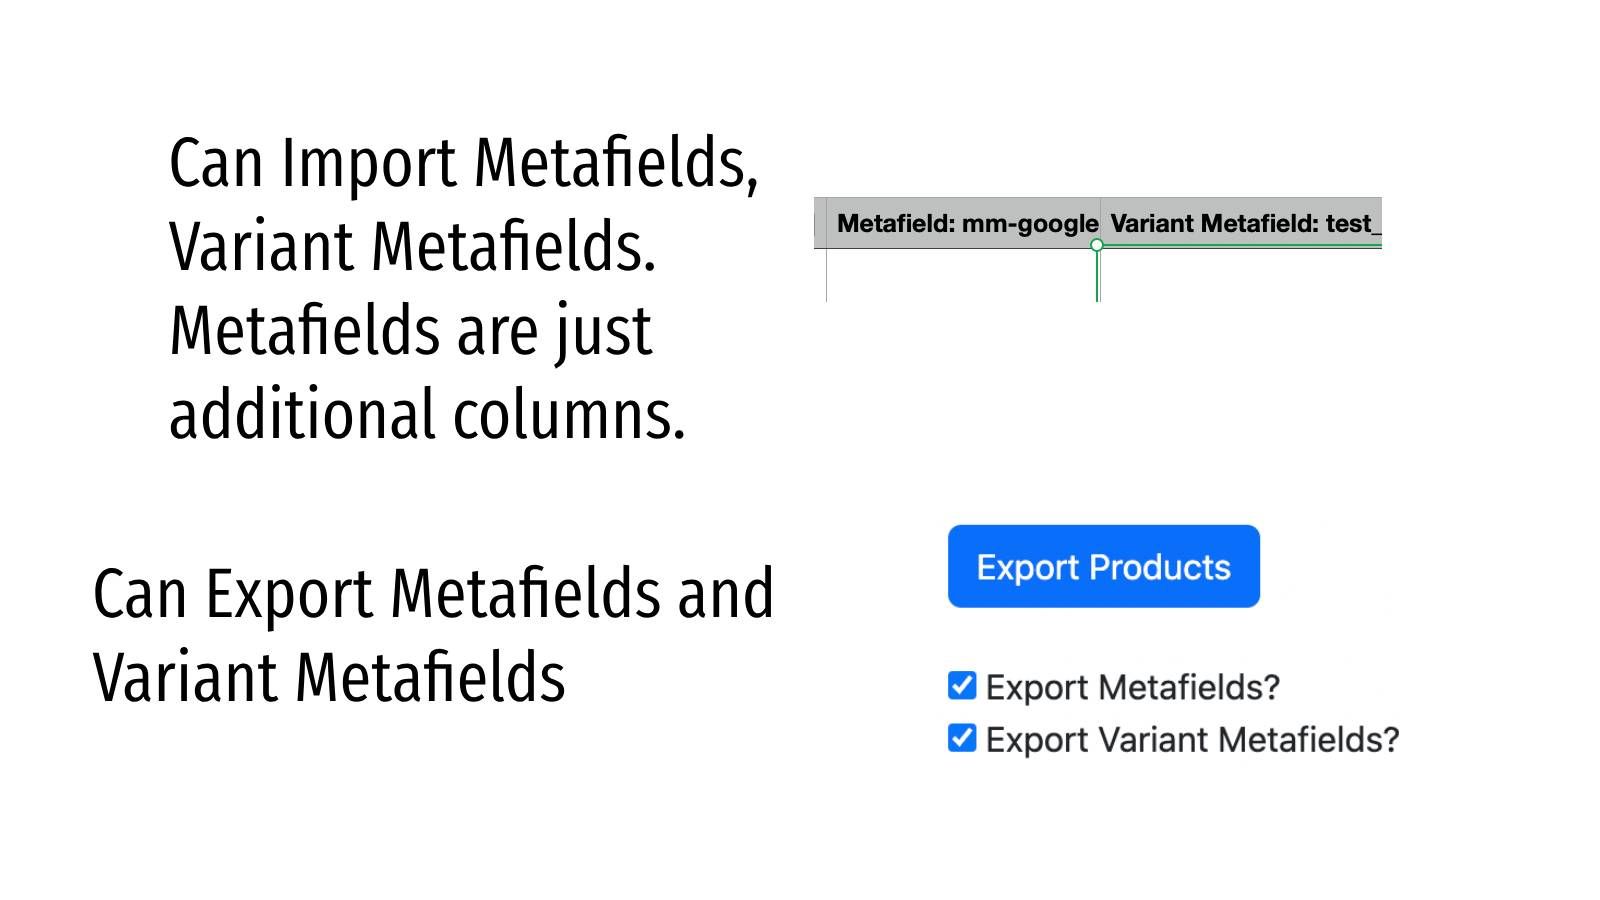 Can Import and Metafields, which are just additional columns.